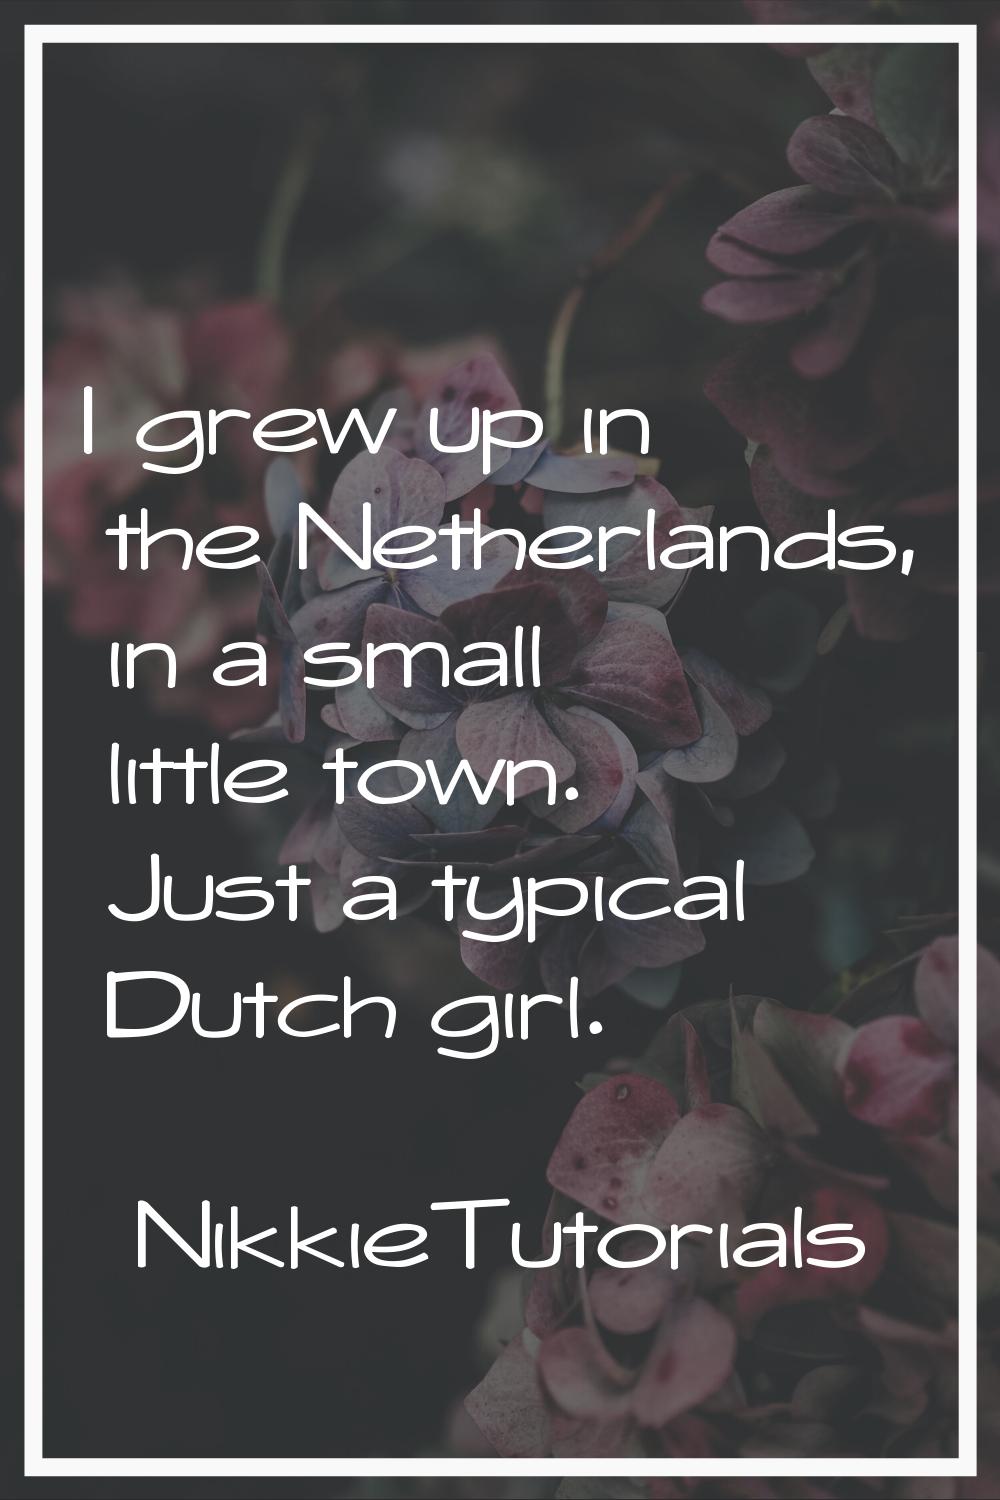 I grew up in the Netherlands, in a small little town. Just a typical Dutch girl.